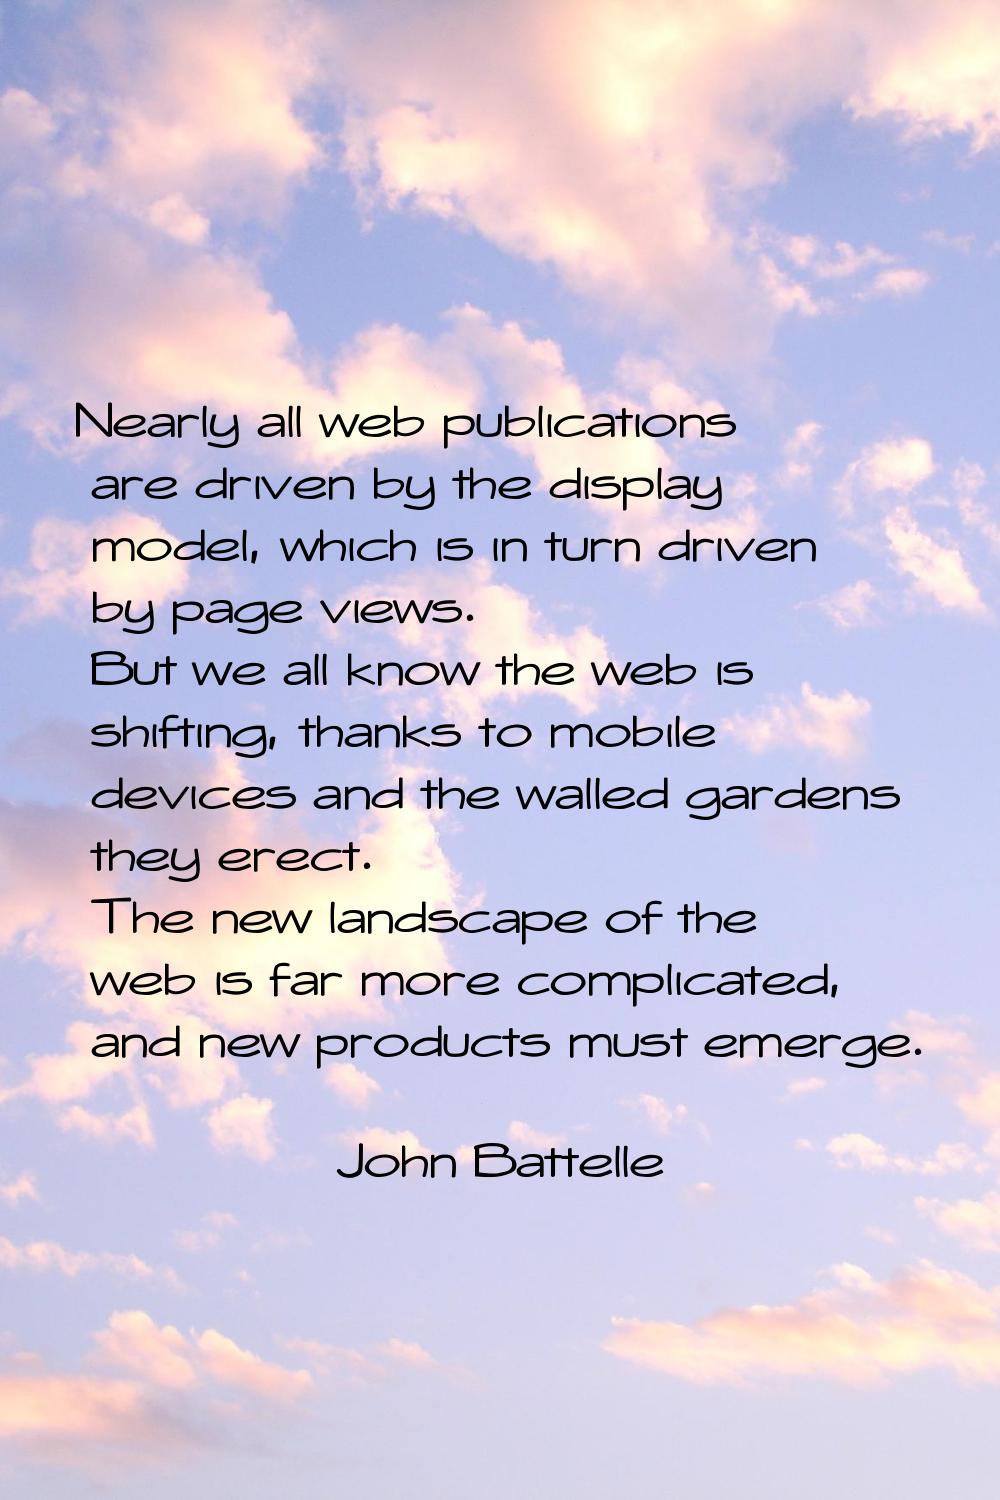 Nearly all web publications are driven by the display model, which is in turn driven by page views.